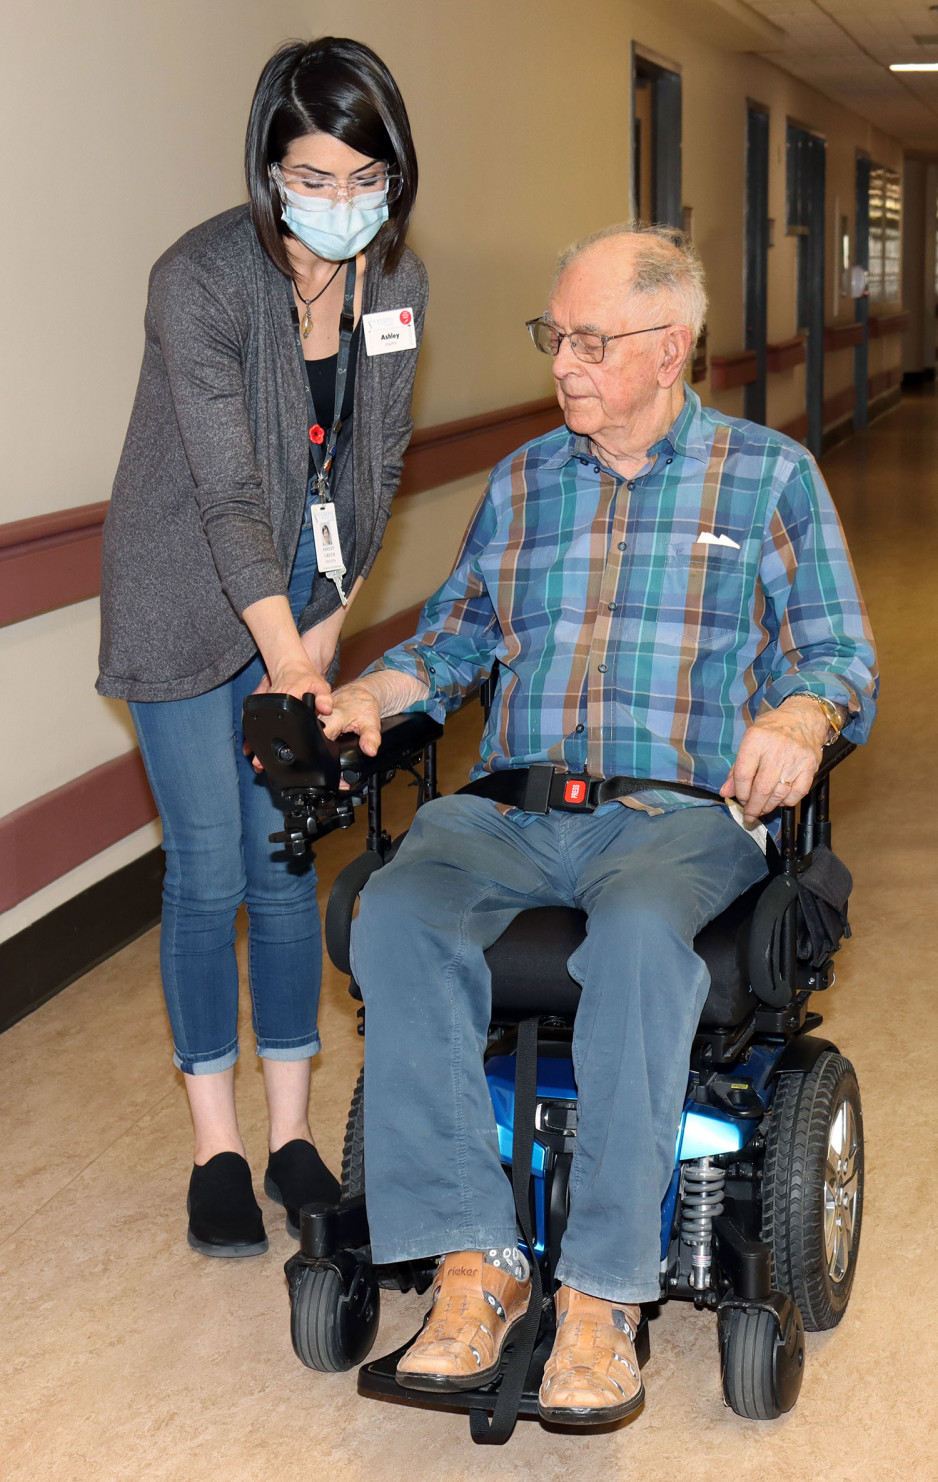 an occupational therapist helping a veteran learn how to use a mobility scooter